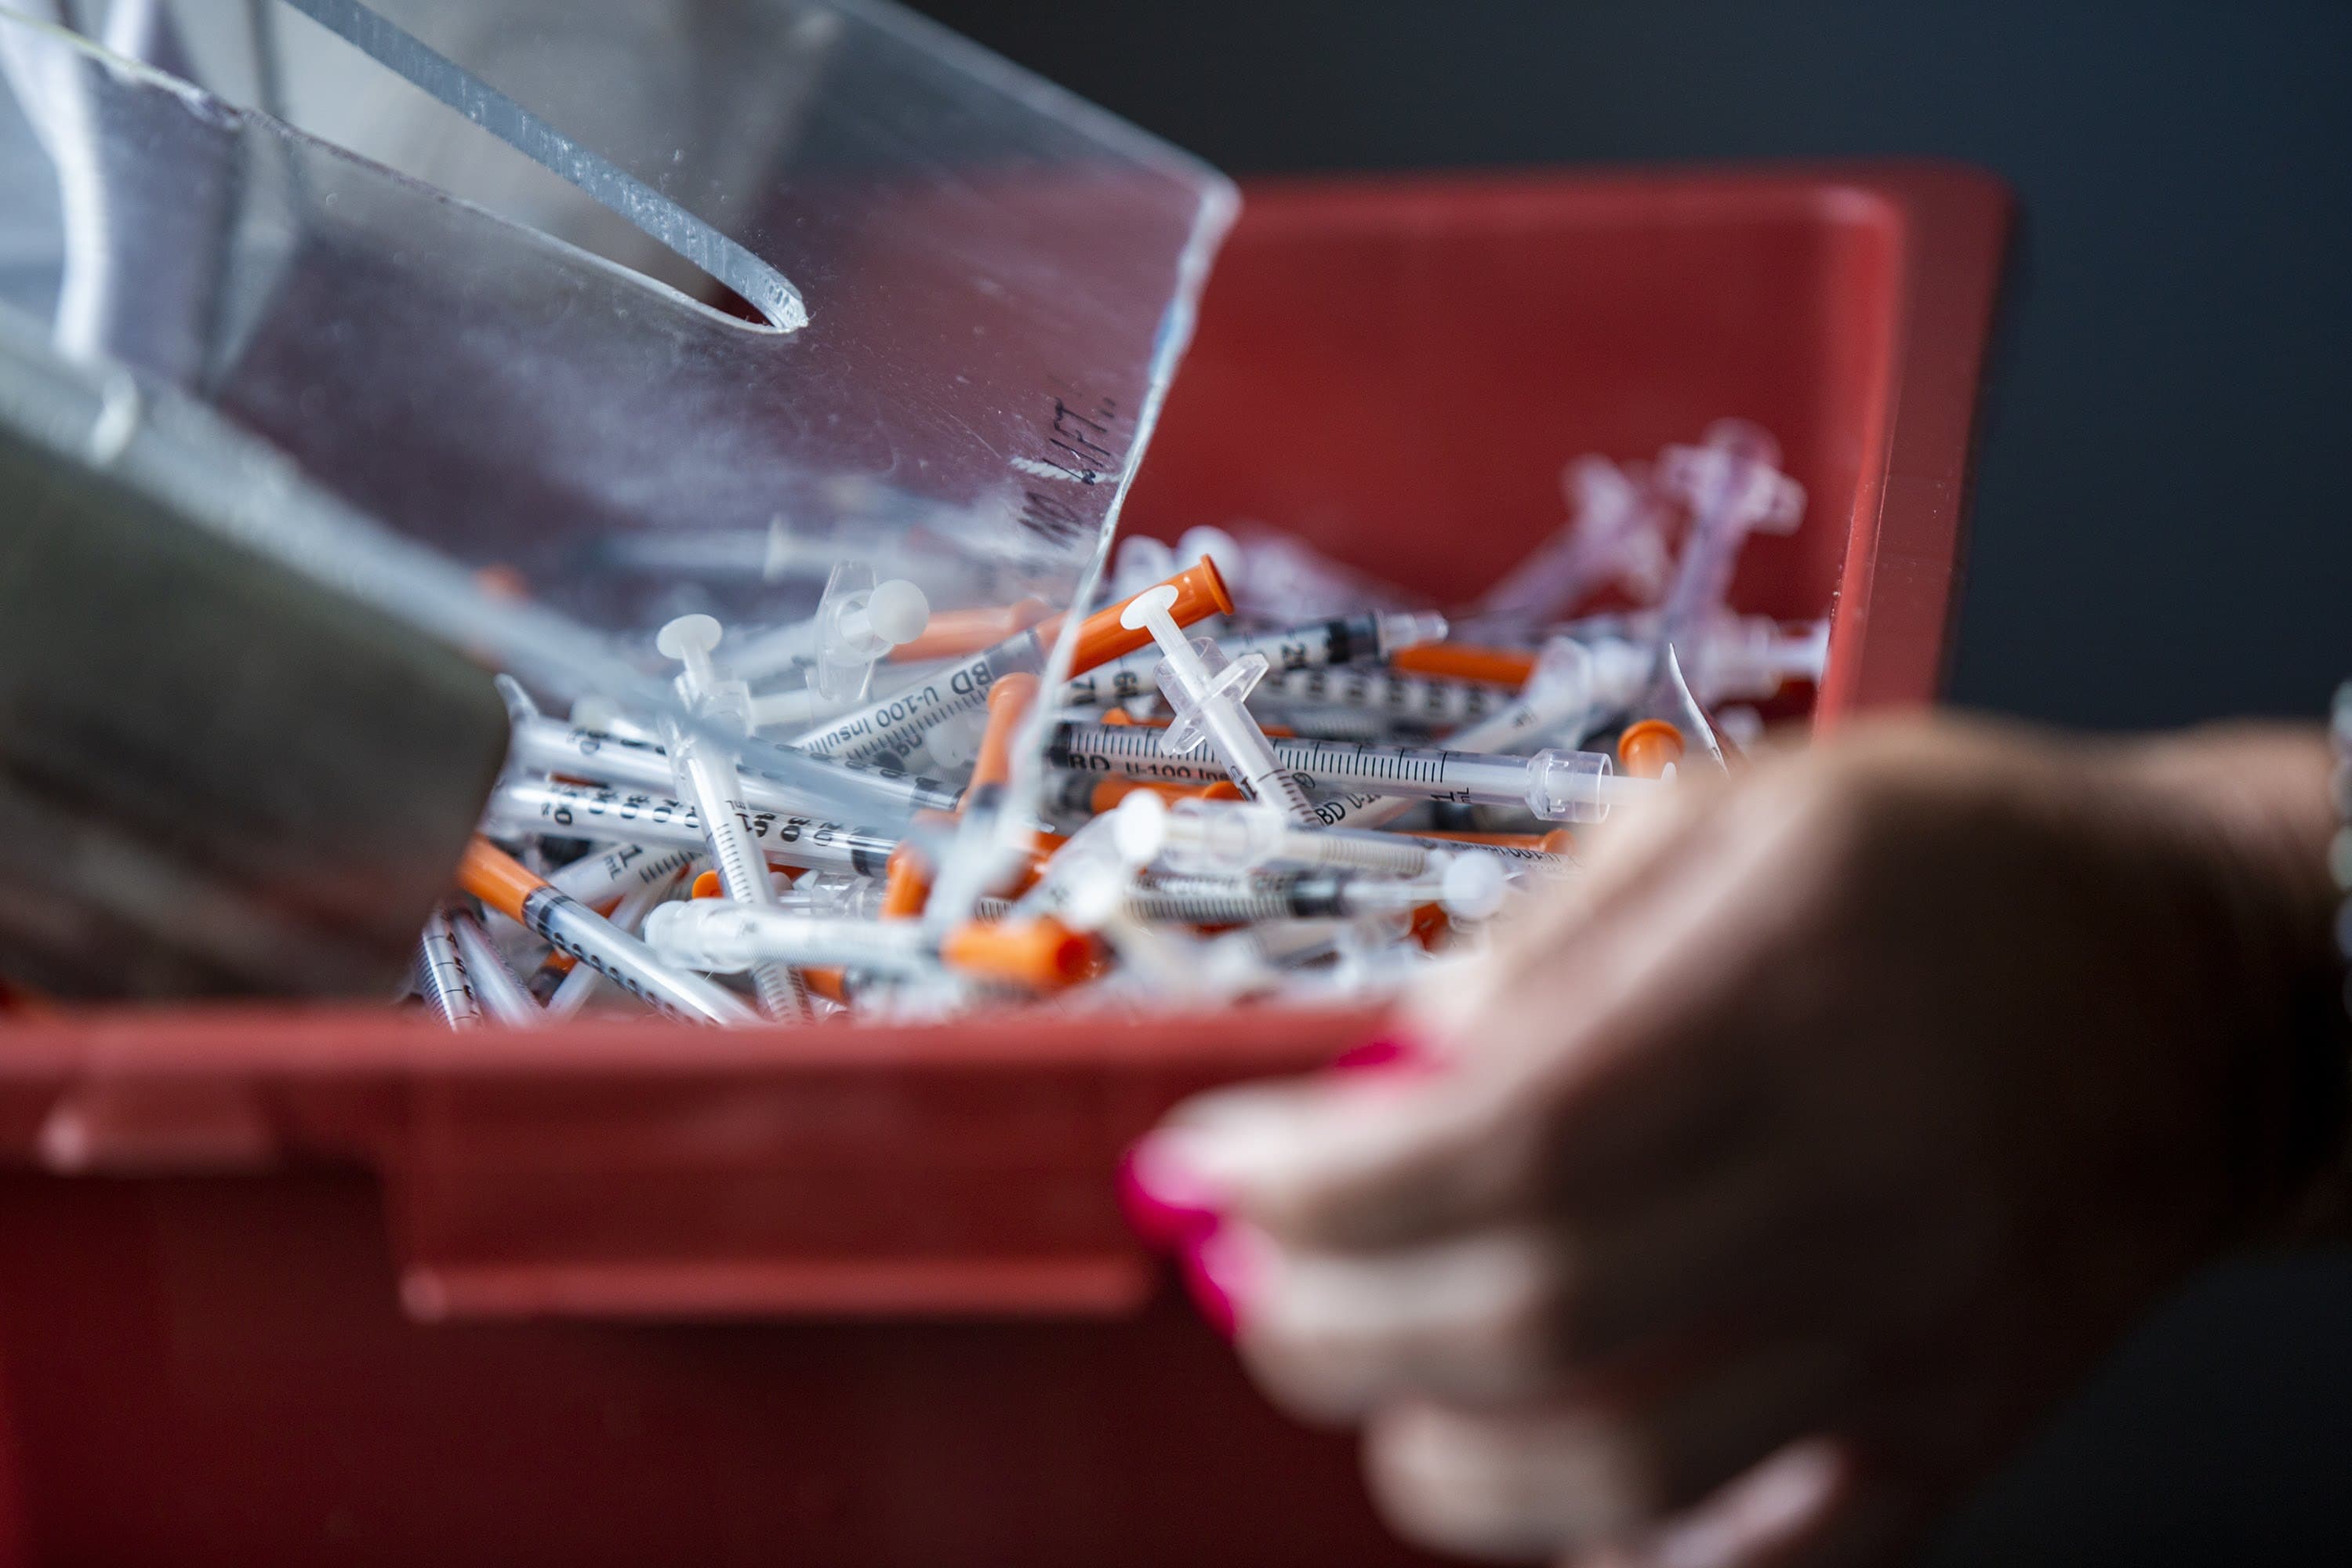 A container filled with close to 2,000 used syringes collected in a single morning at the Southampton Street Shelter in Boston. (Jesse Costa/WBUR)